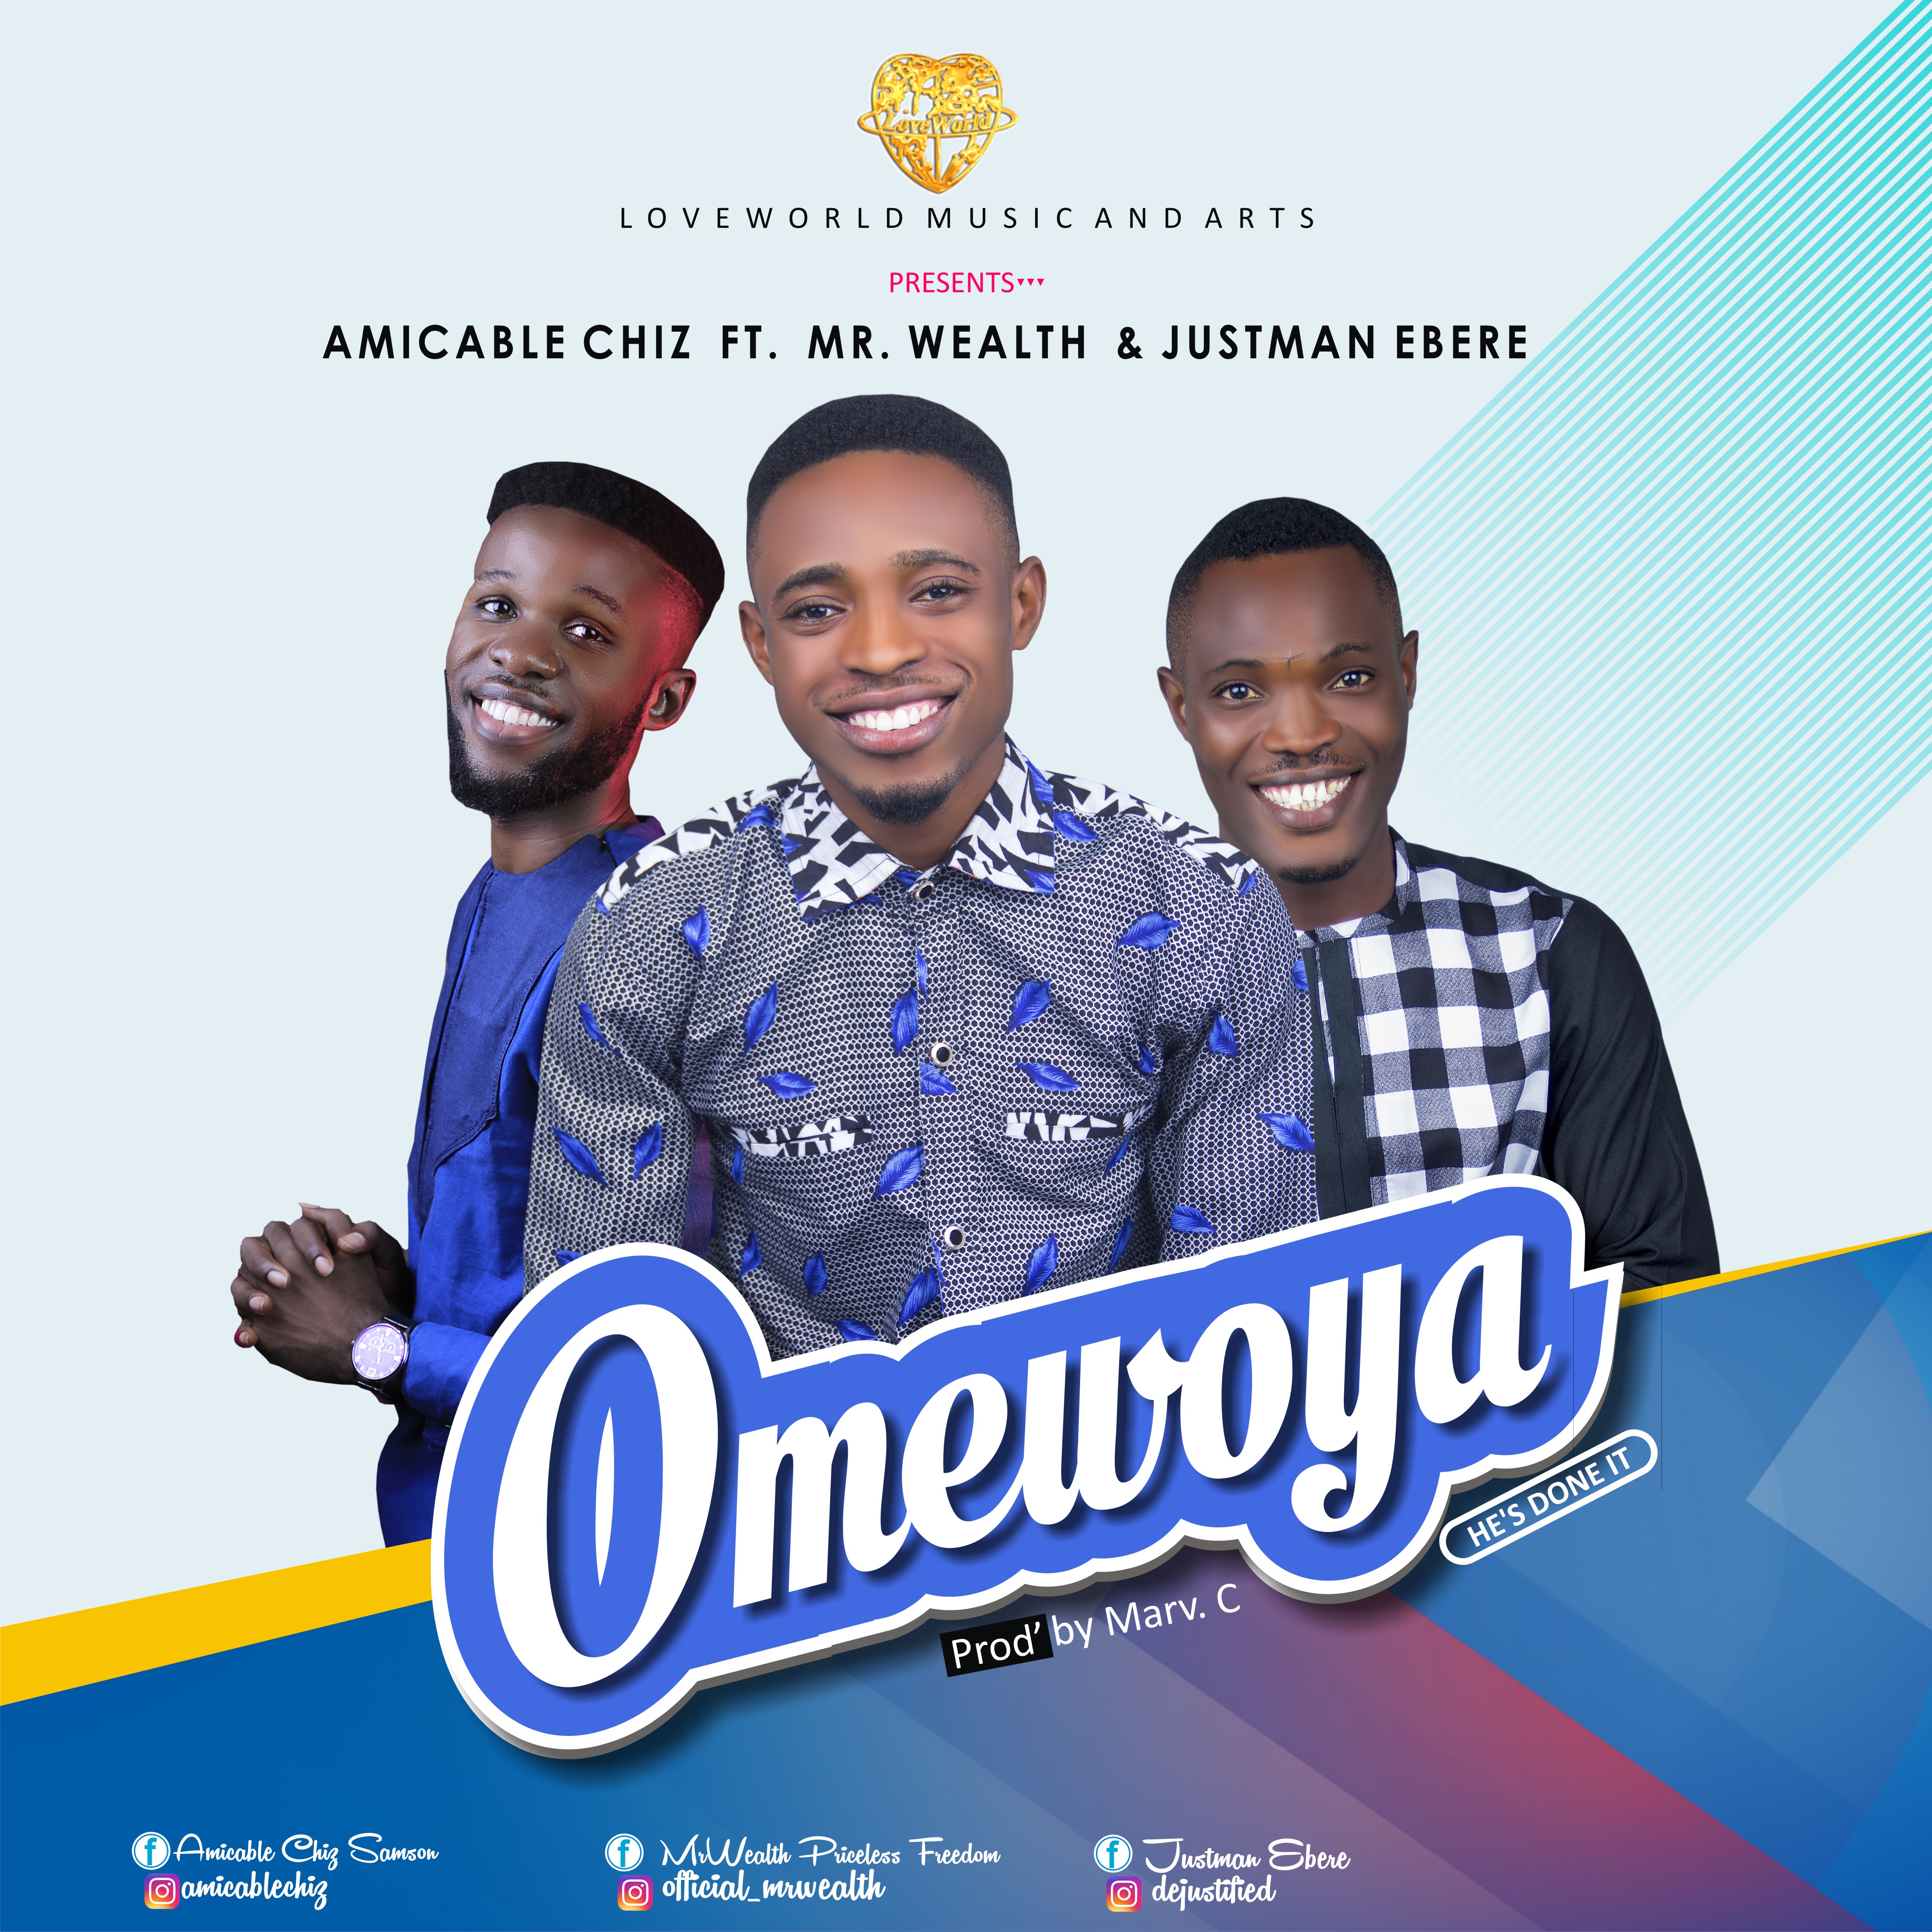 Omewoya by Amicable Chi